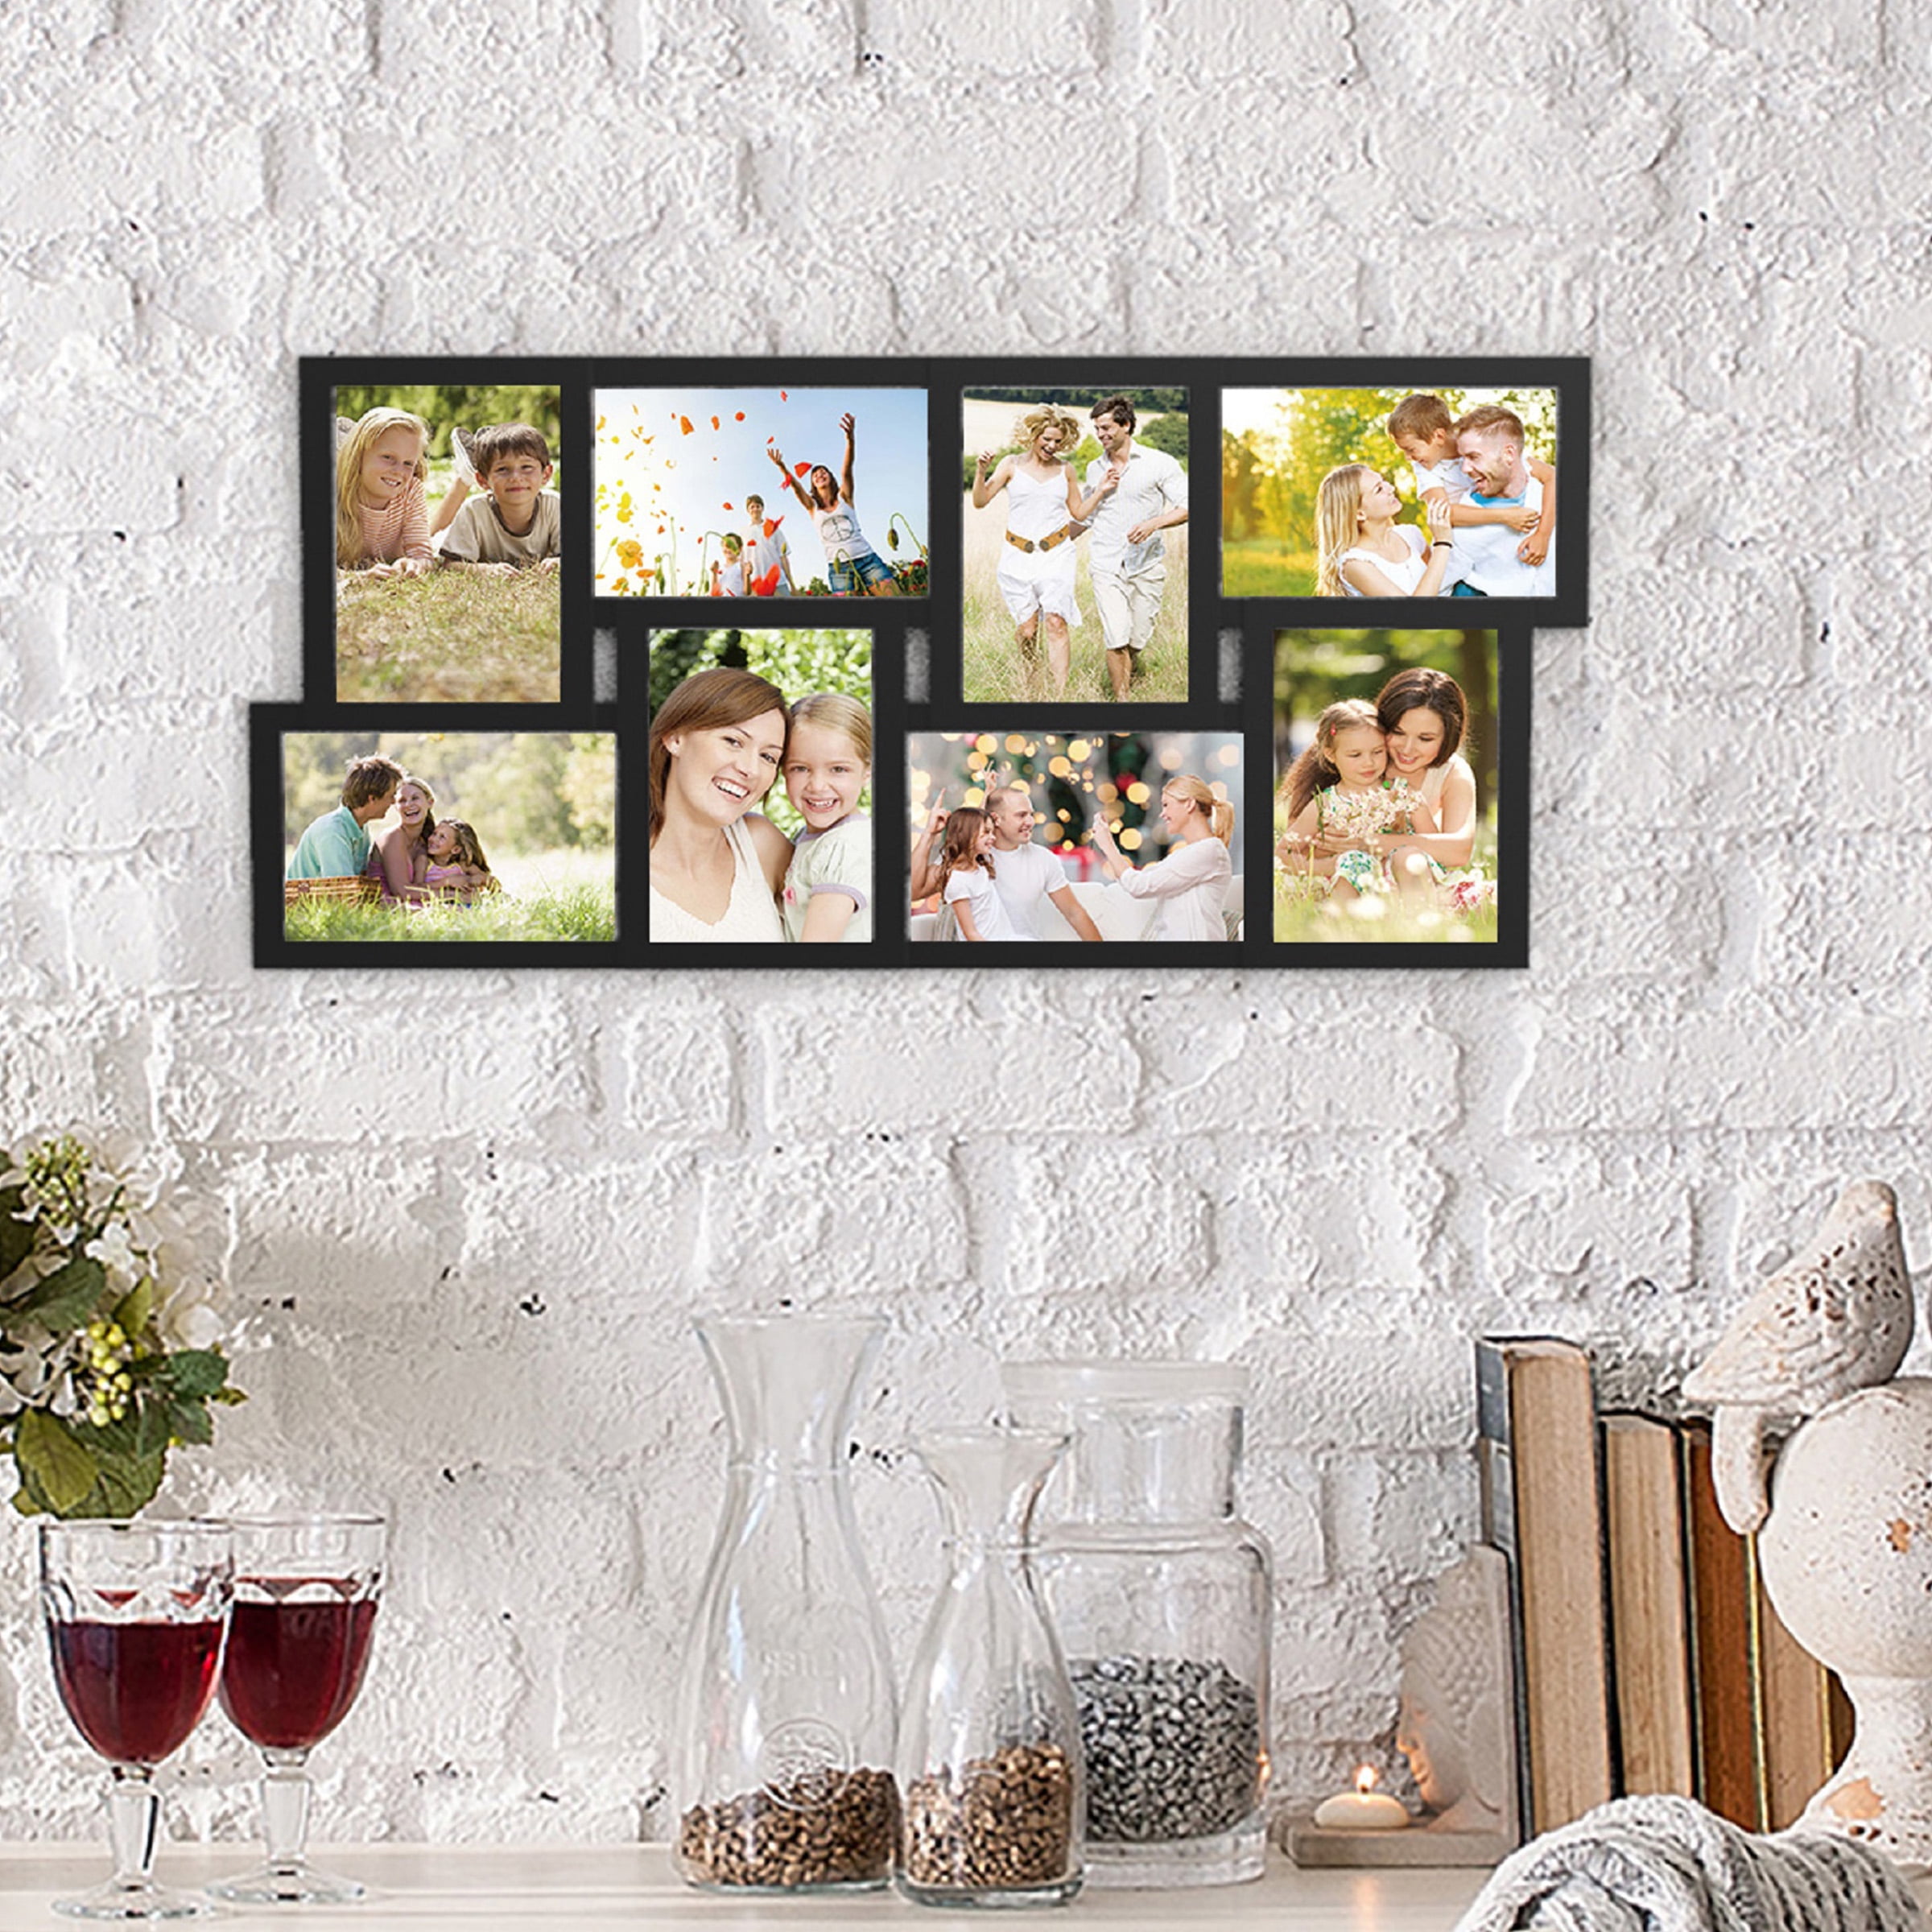 Lavish Home Collage Picture Frame with 8 Openings for 4x6 Photos- Wall